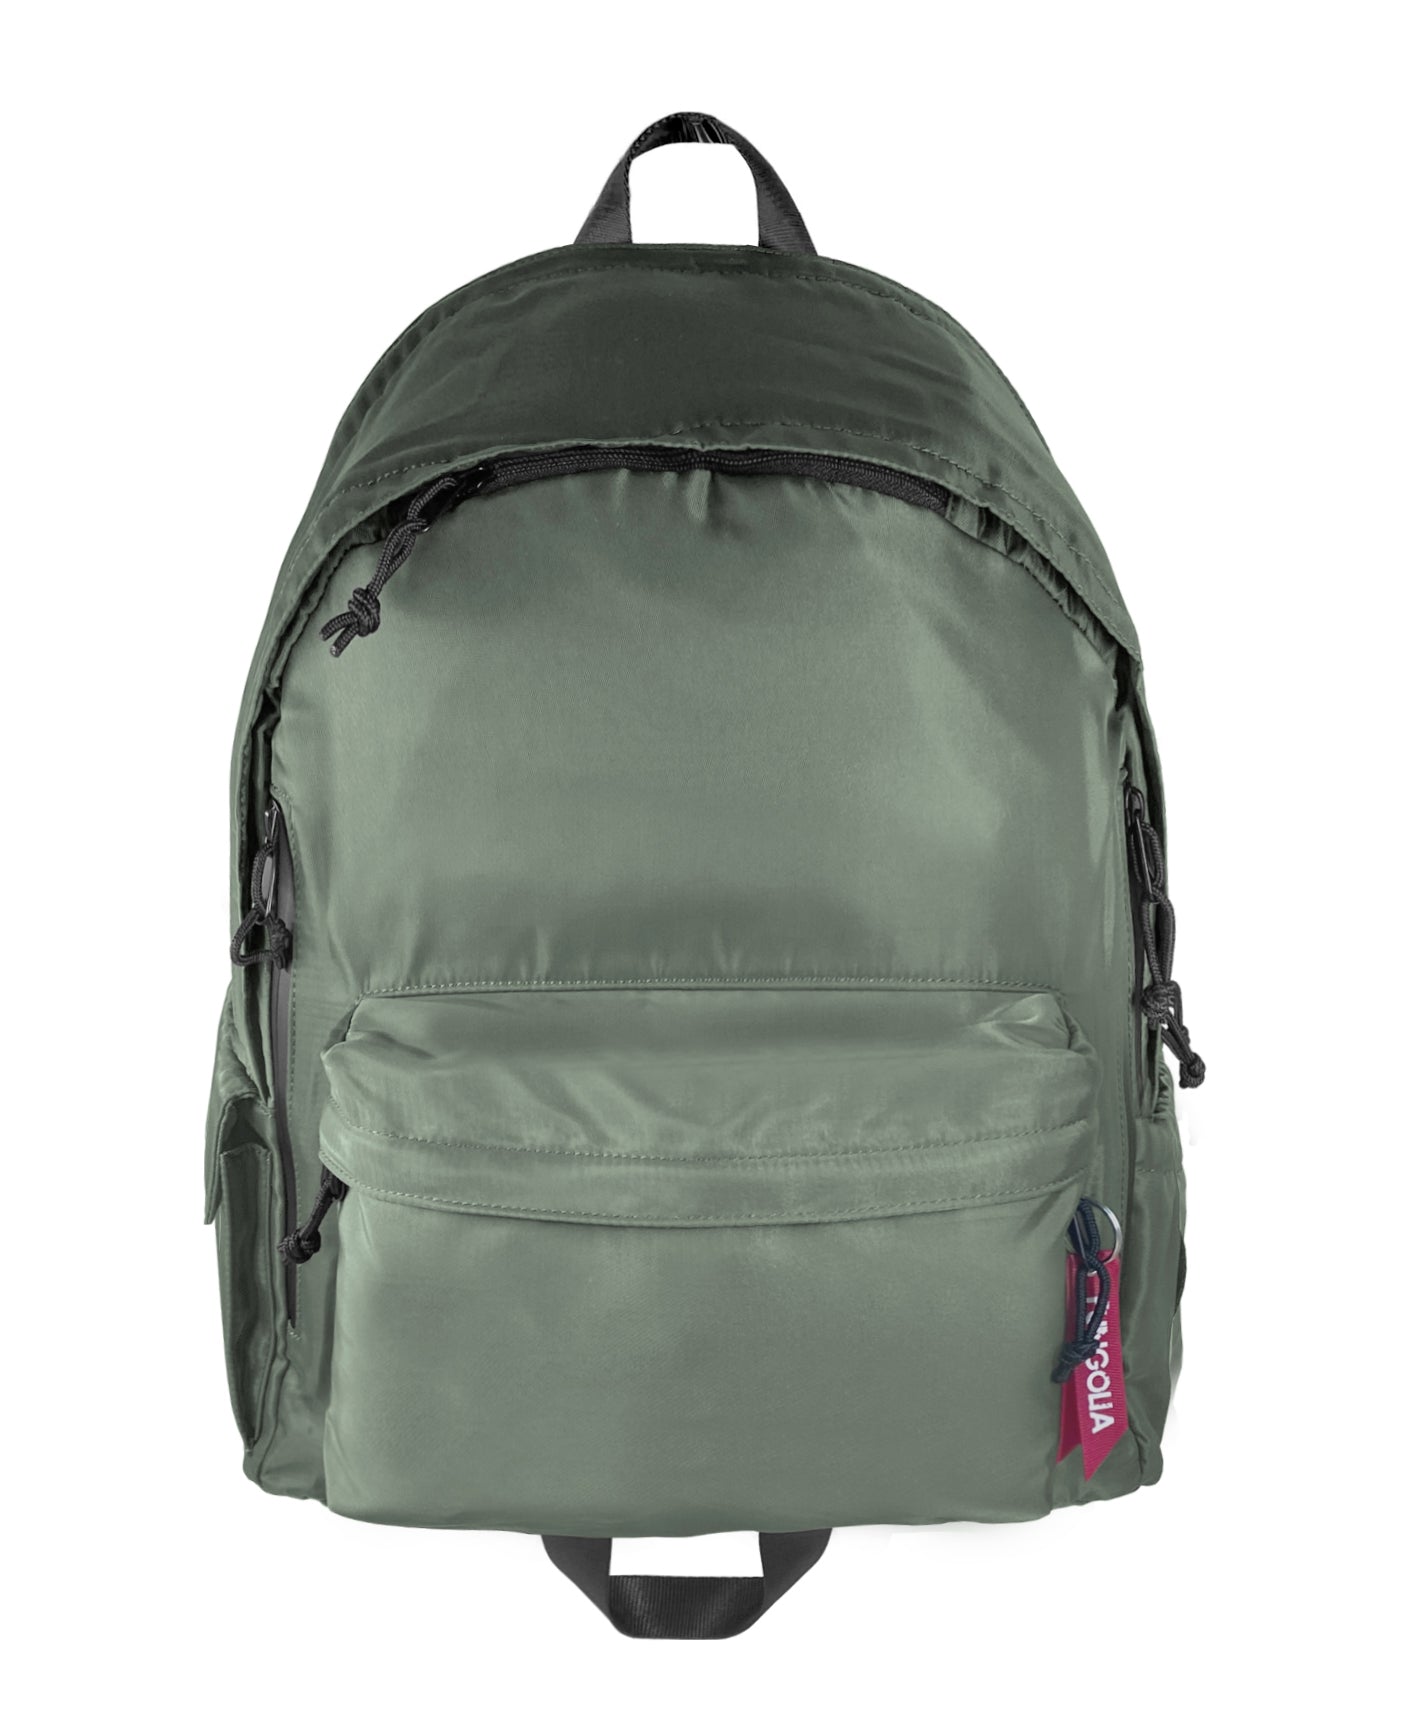 Gen 2 Premium Classic Backpack 22L - Mid size (Twill Army Green) - FUNGOLIA